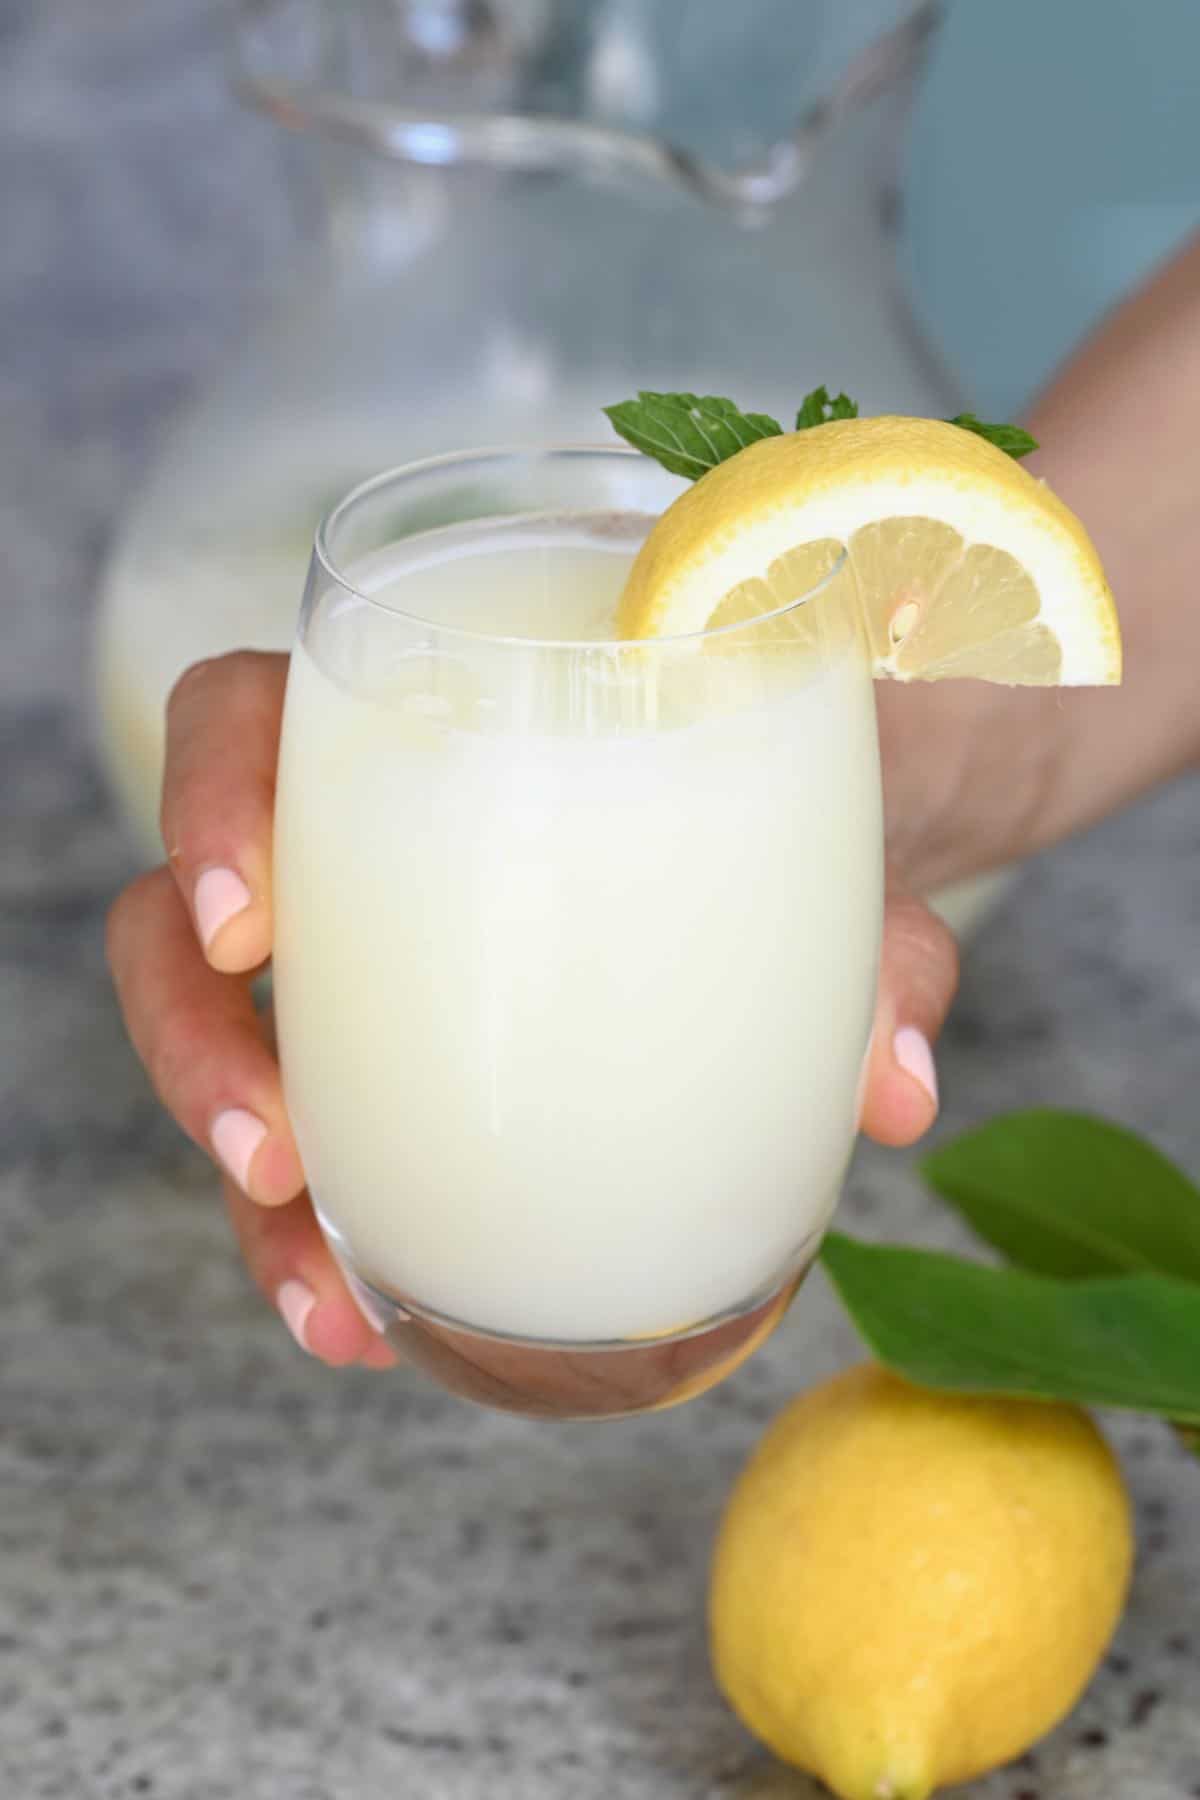 A hand holding a glass with creamy lemonade